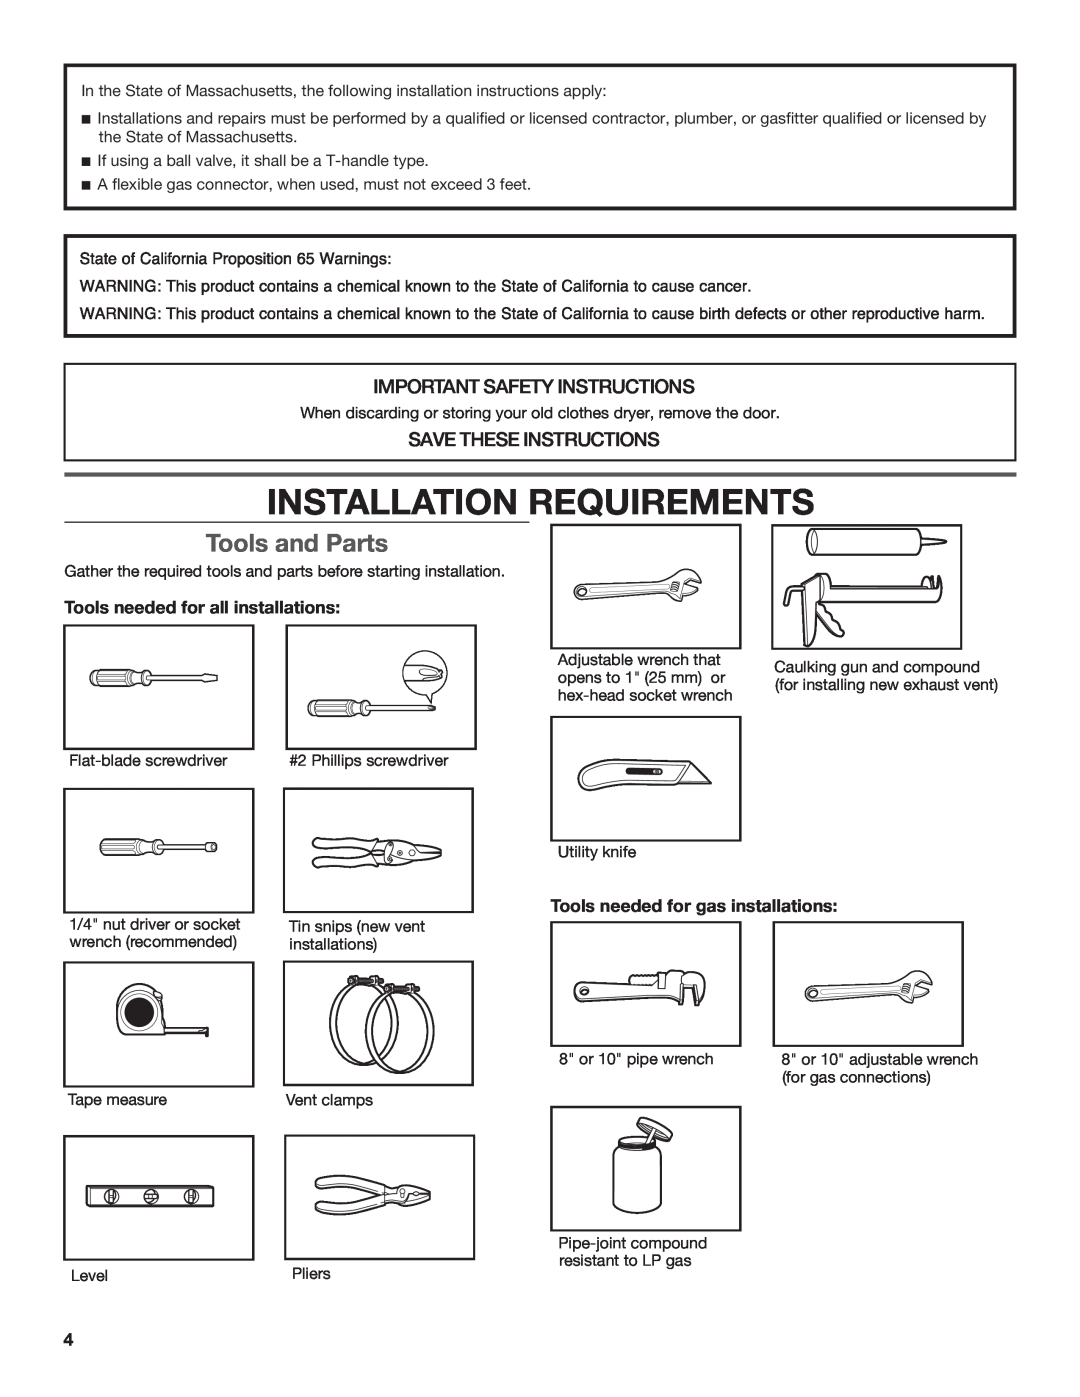 Maytag W10096984A Installation Requirements, Tools and Parts, Important Safety Instructions, Save These Instructions 